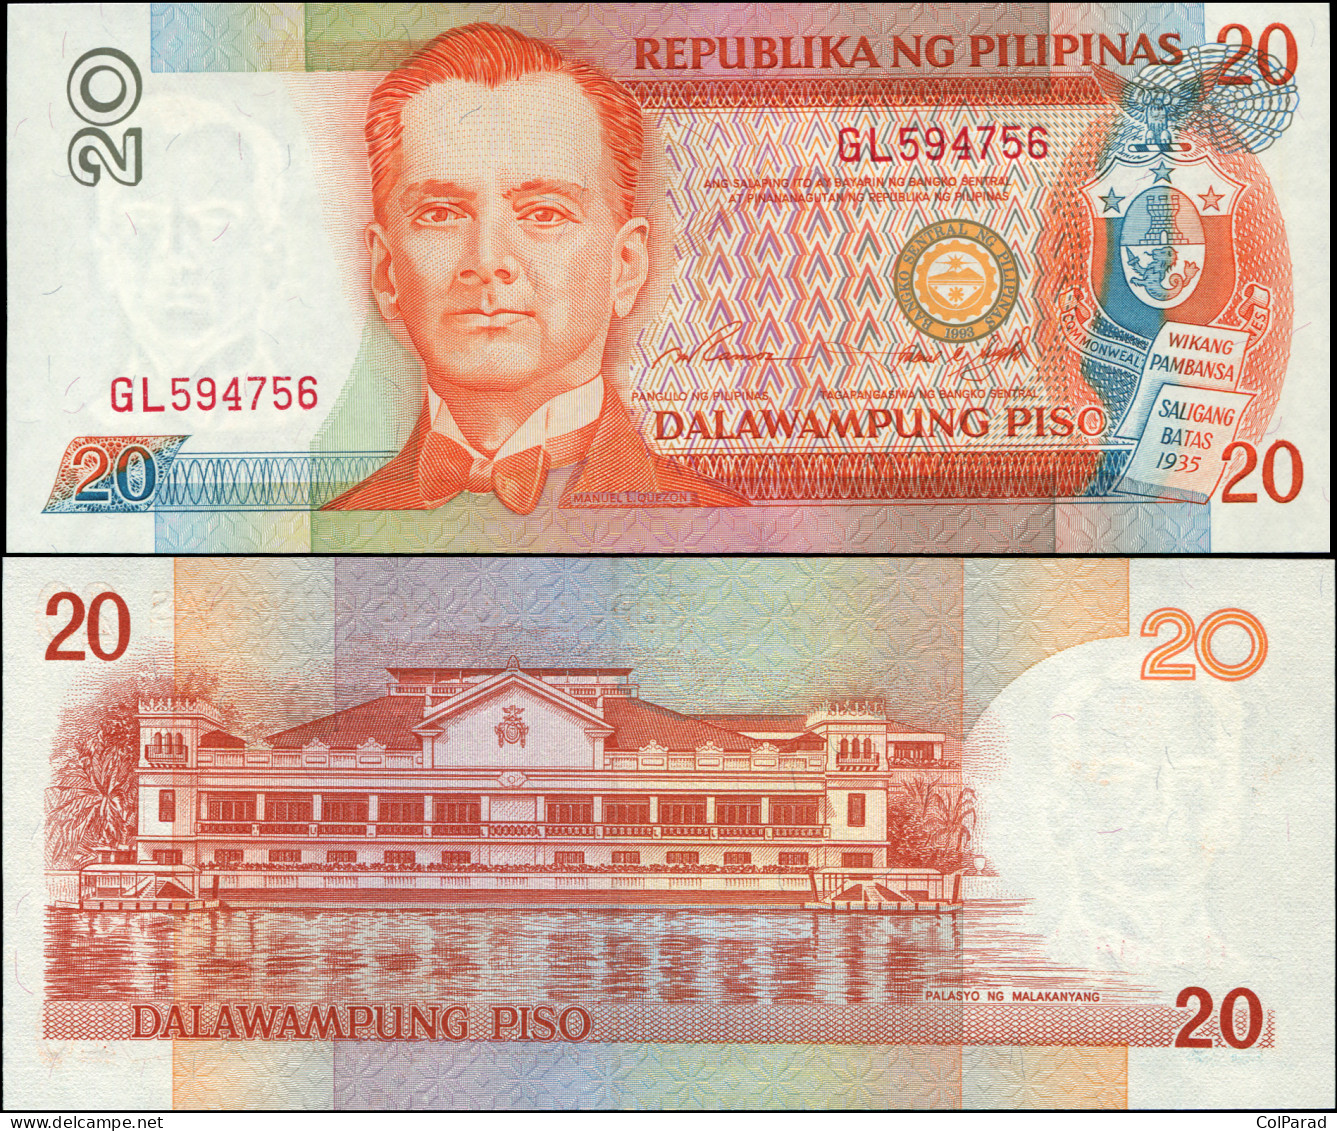 PHILIPPINES 20 PISO - ND (1997) - Paper Unc - P.182a Banknote - Philippines